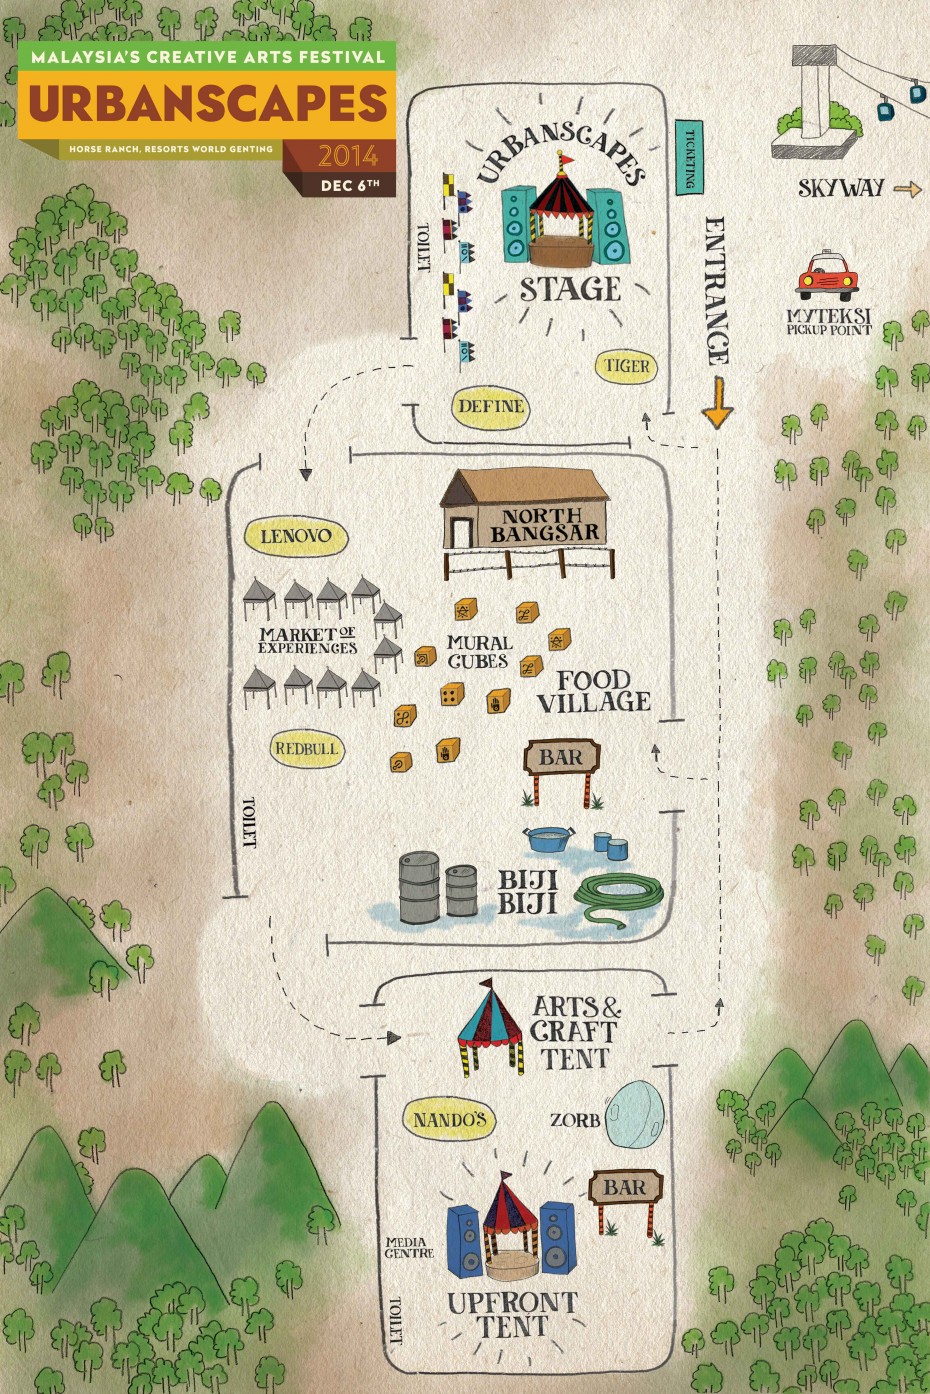 The festival map by Urbanscapes.